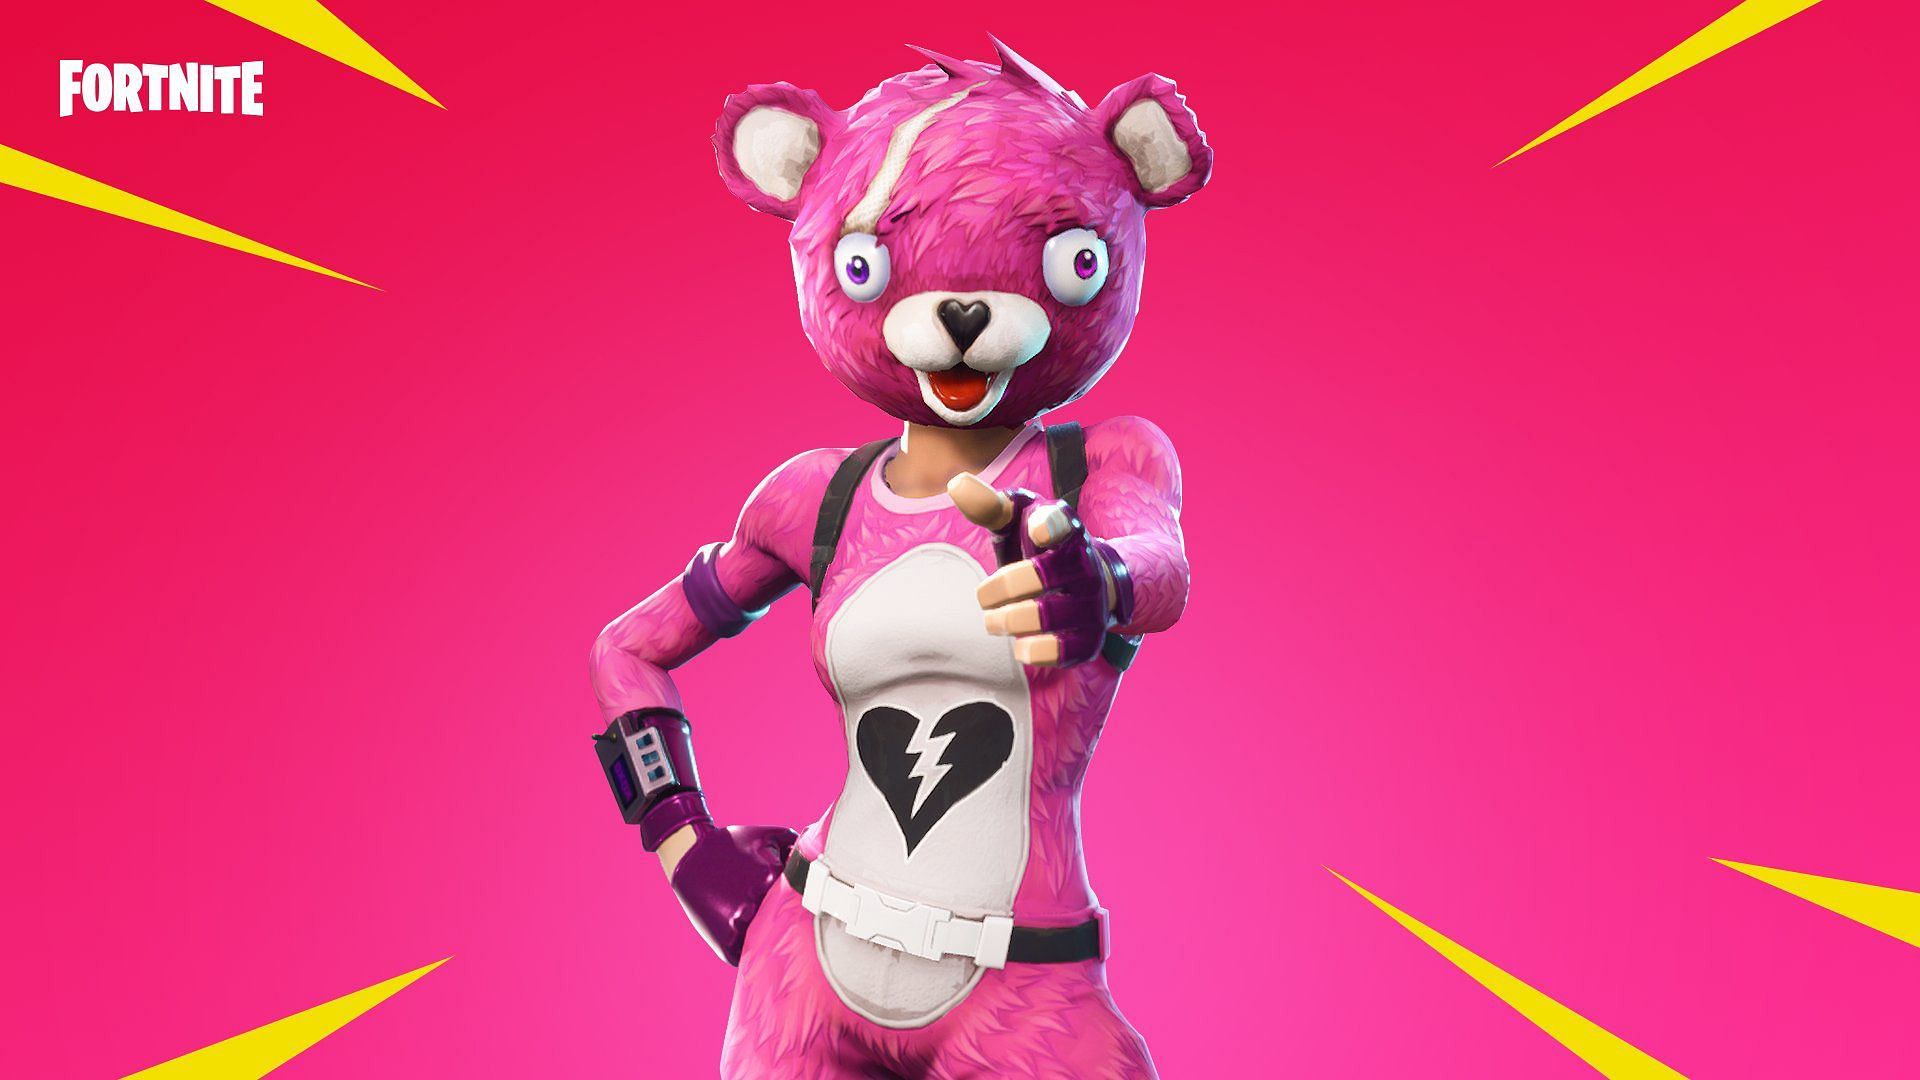 Cuddle Team Leader, or a reference to the Fortnite skin, was found in New Horizons. (Image via Epic Games)